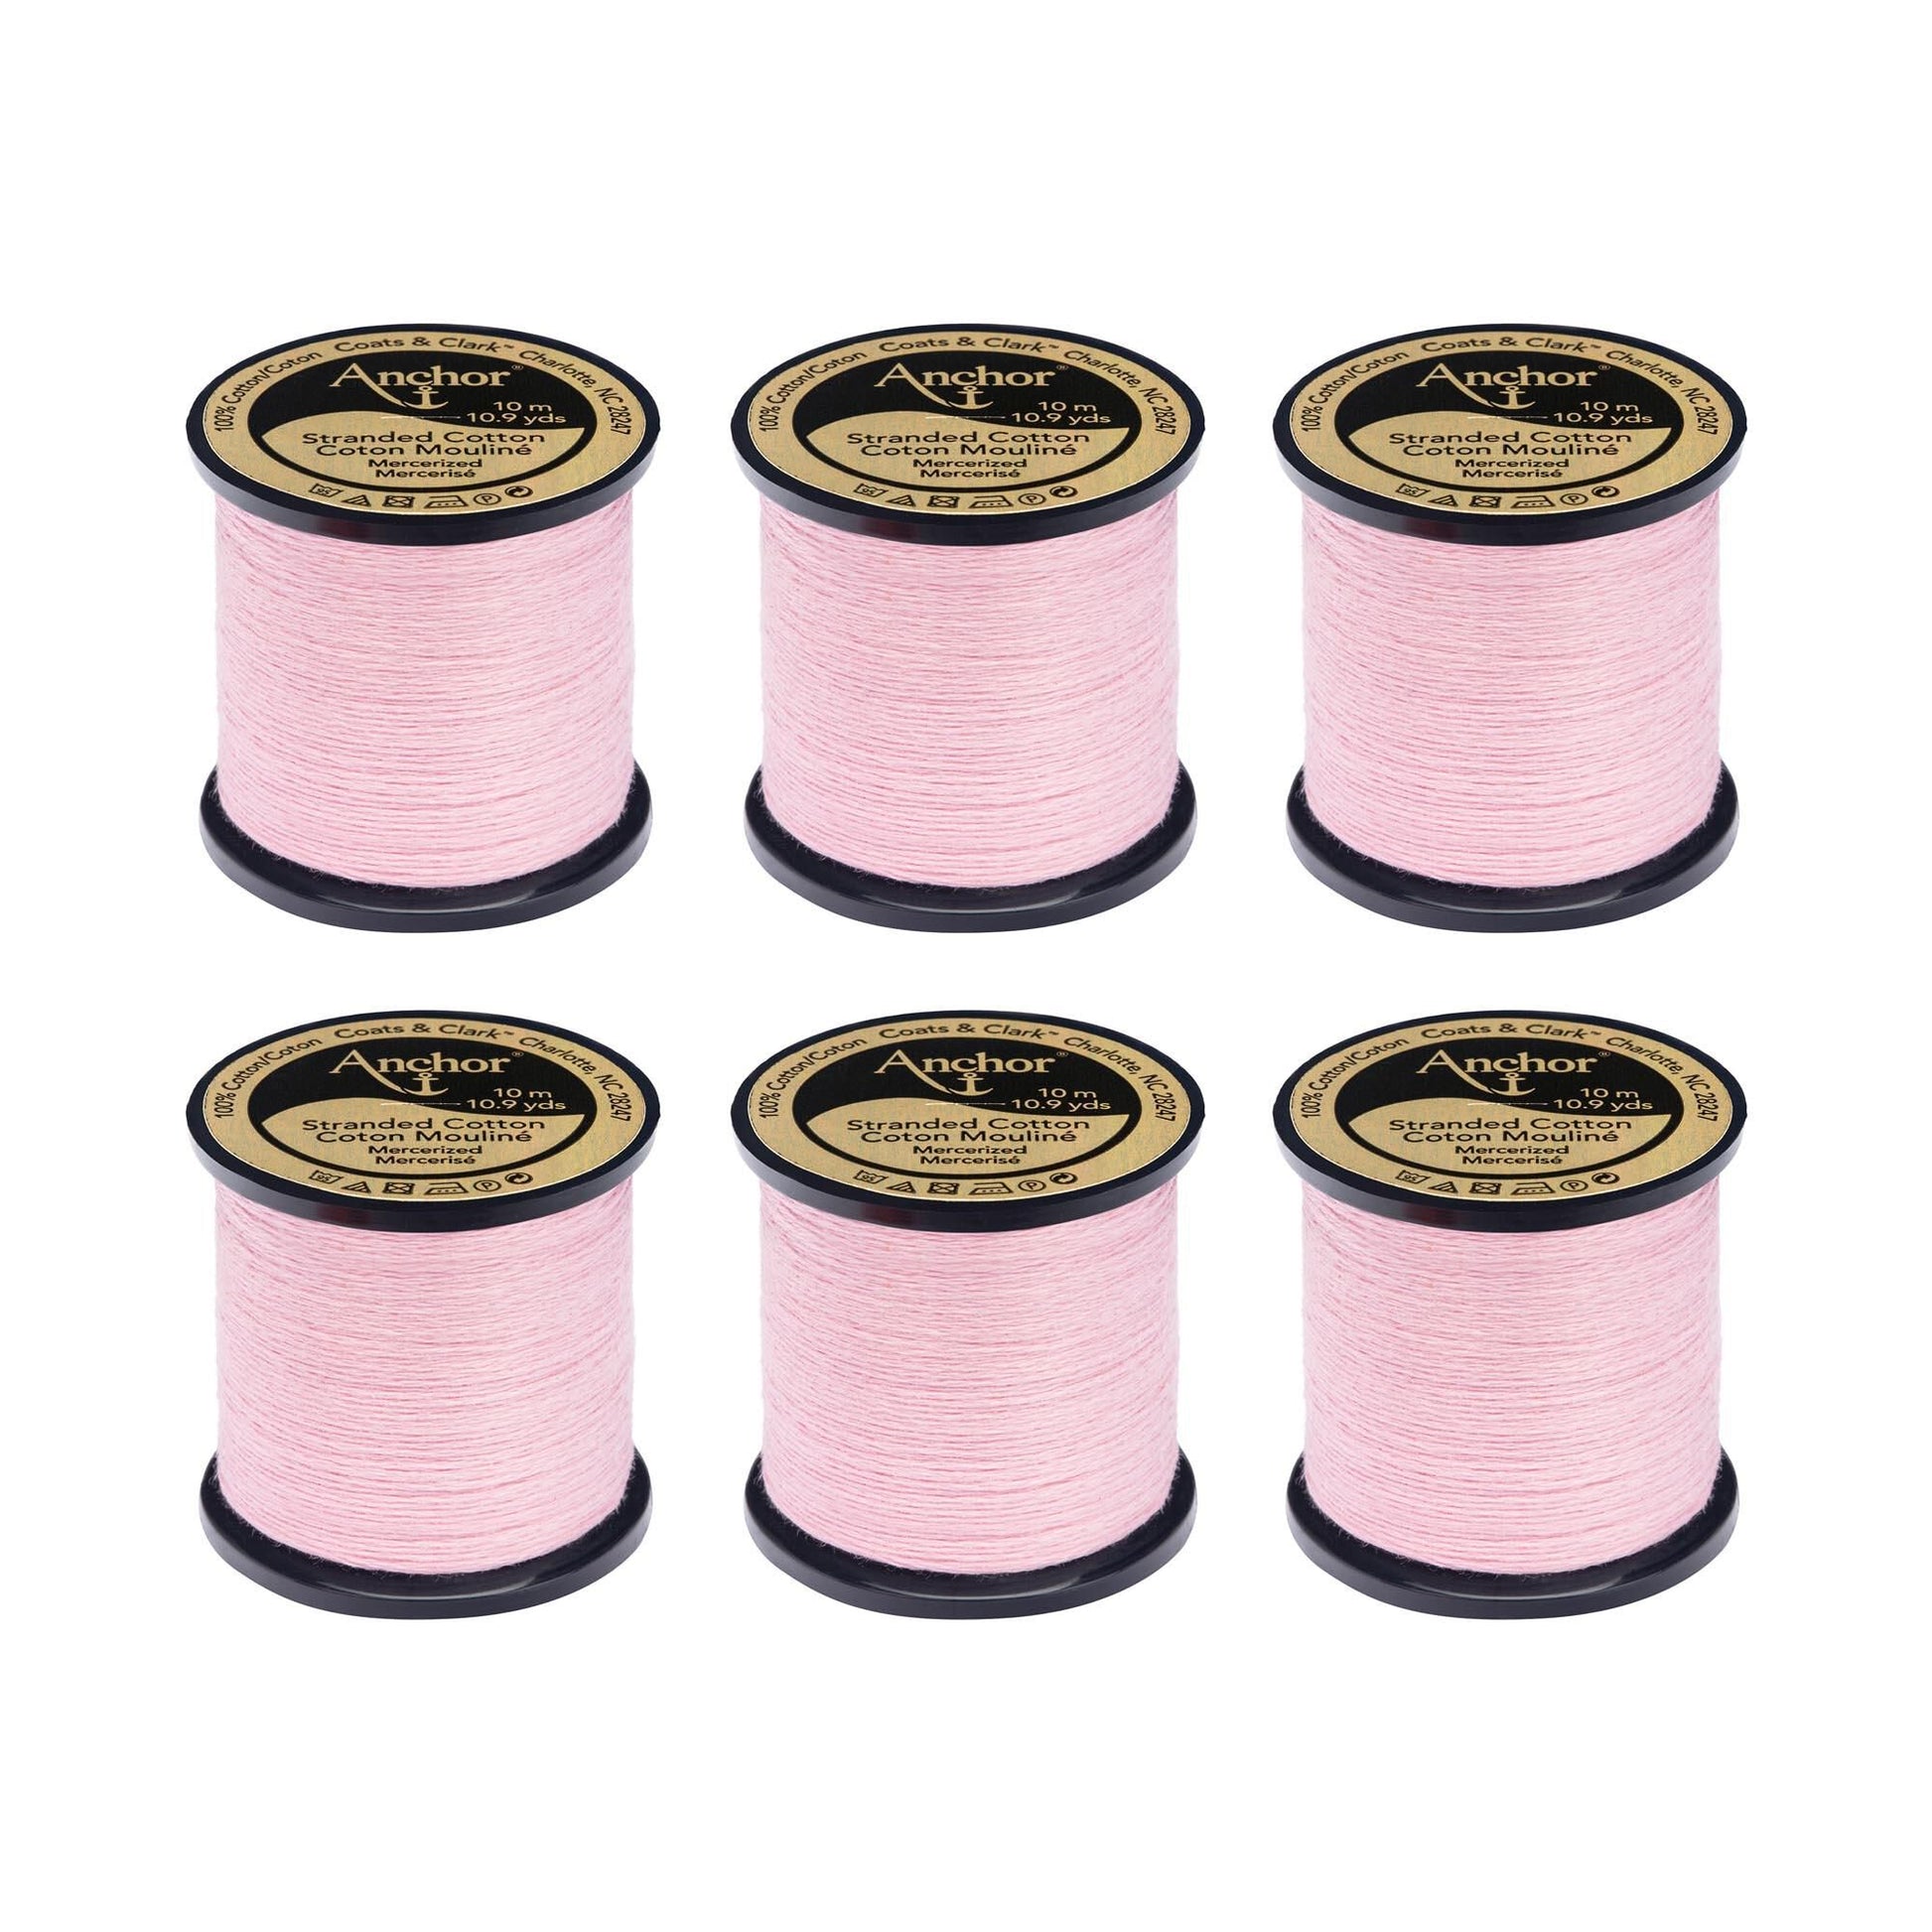 Anchor Spooled Floss 10 Meters (6 Pack) 0049 China Rose Light